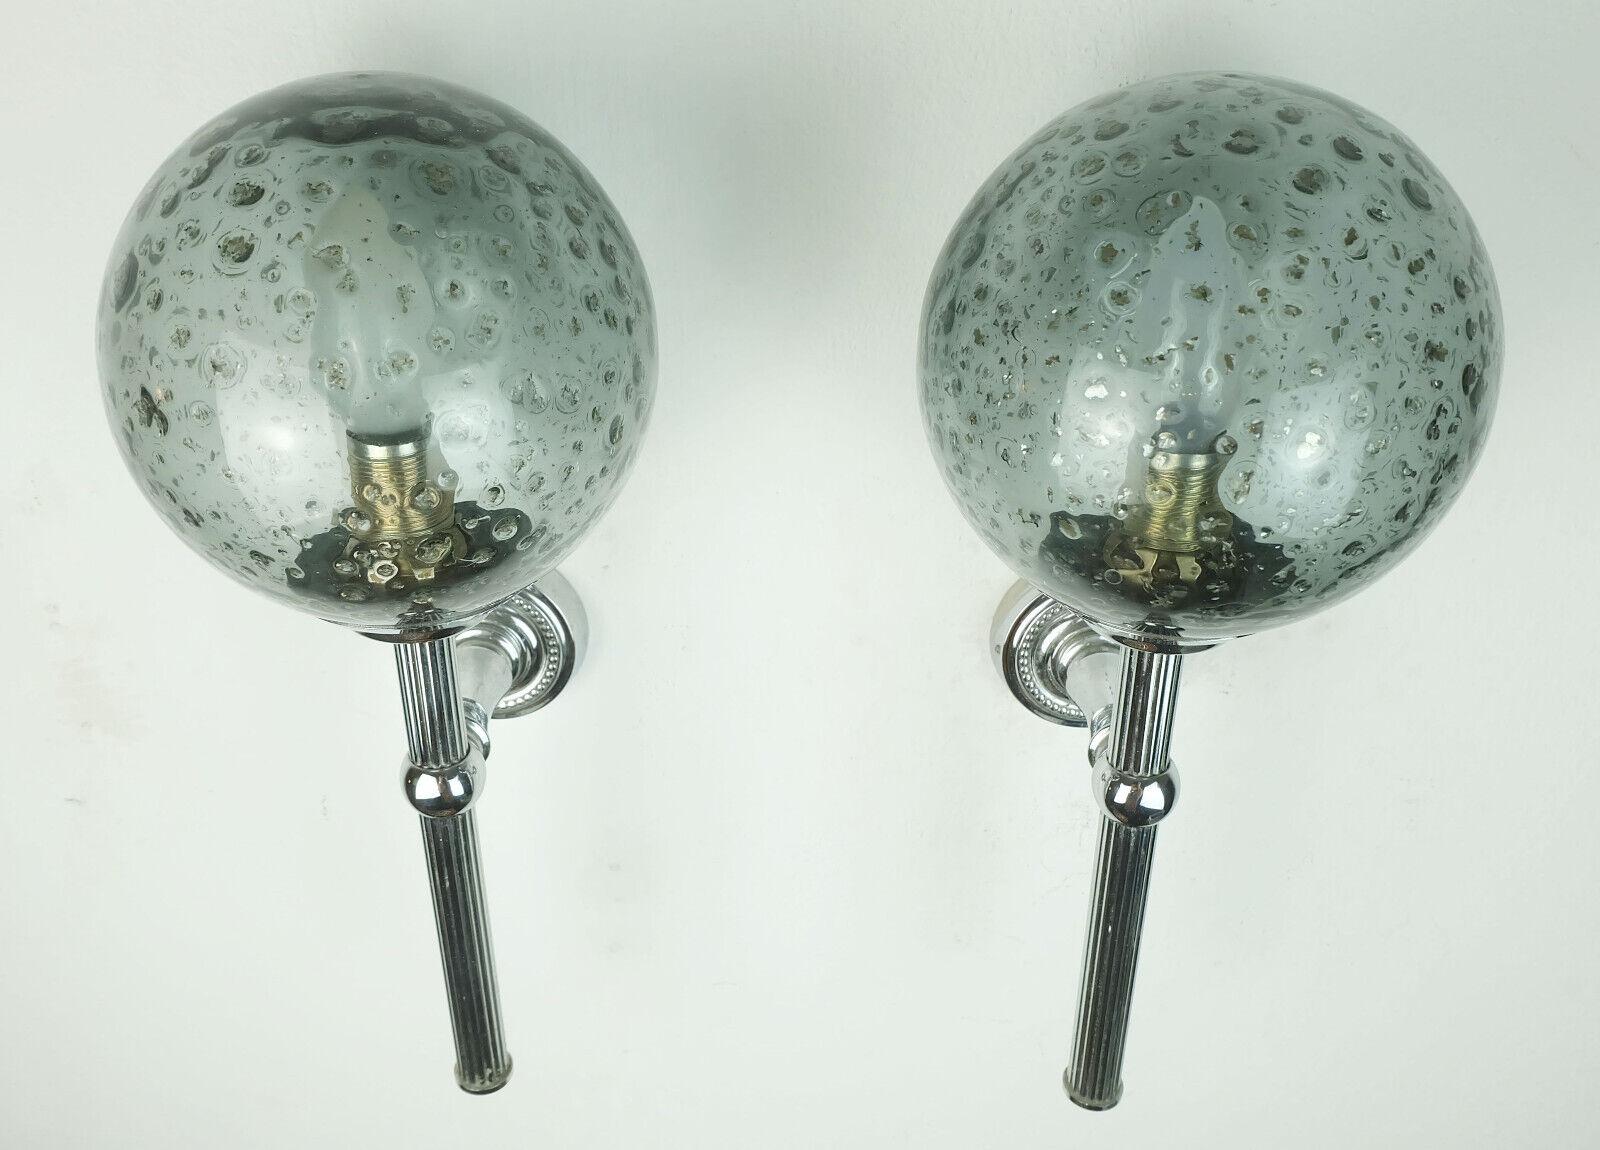 A beautiful and elegant pair of sconces manufactured in the 1960s to 1970s. The base is made of chrome-plated metal with a slight art deco touch in the design. The ball-shaped shades are made of blueish gray smoked glass with slightly metallic